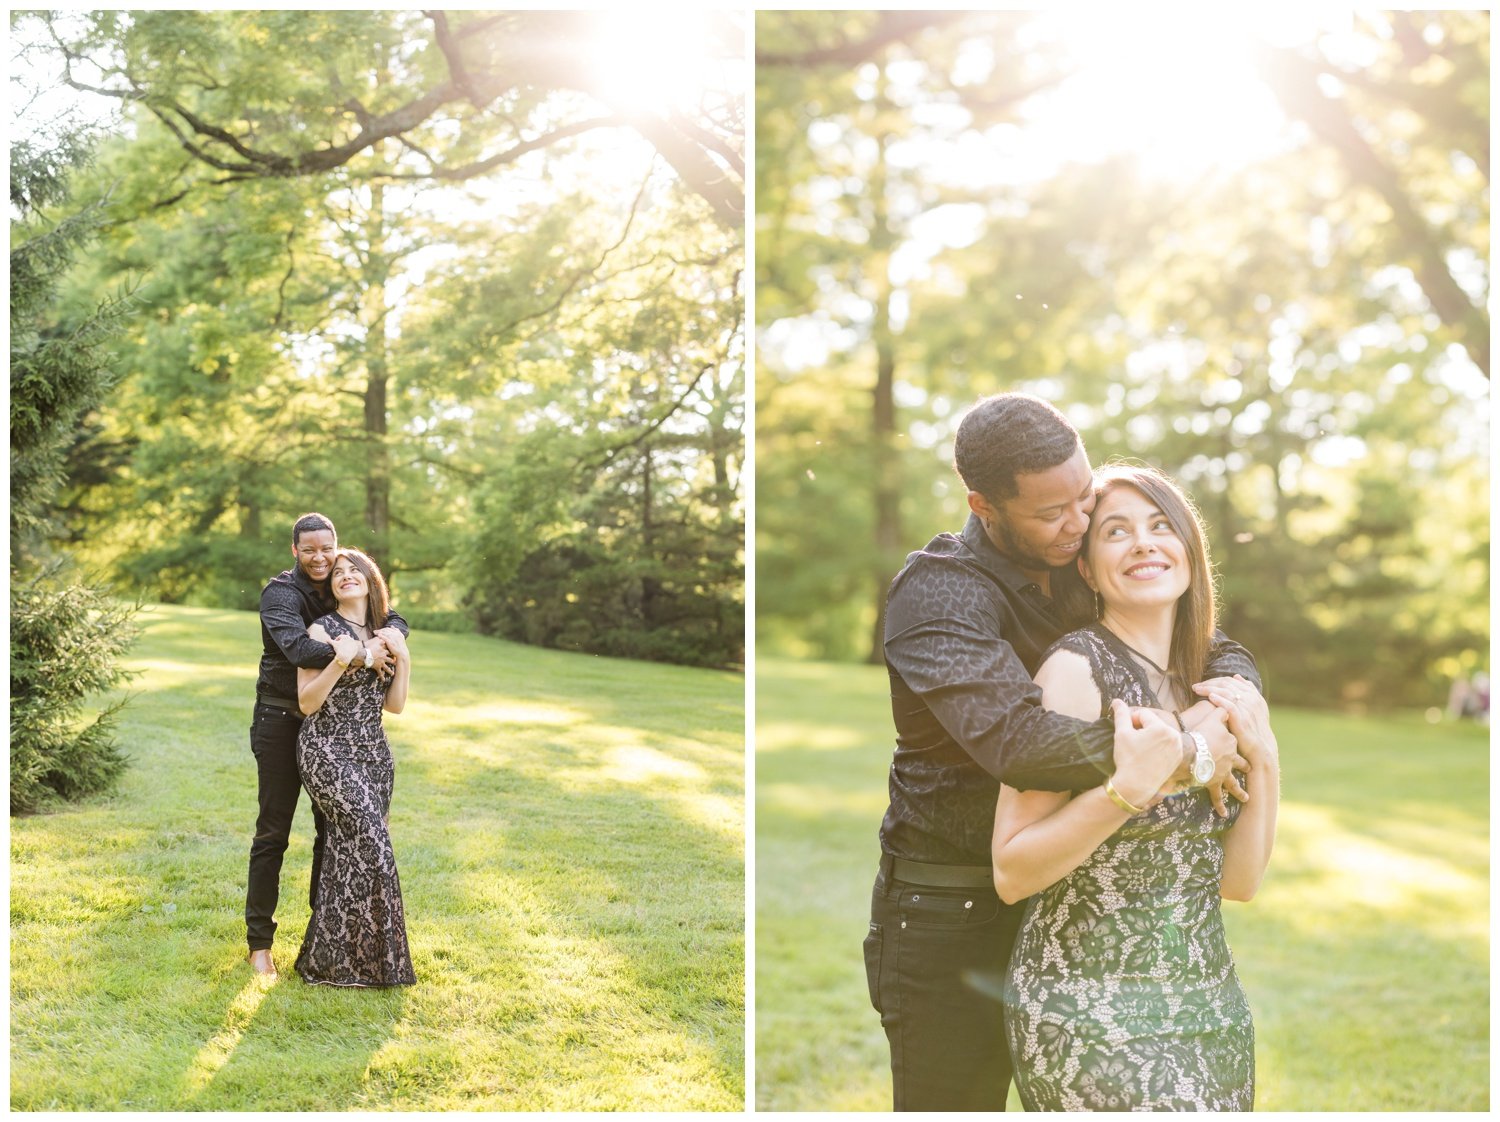 Queer-Photographers-East-Coast-Longwood-Gardens-Engagement-Session-LGBTQ-3